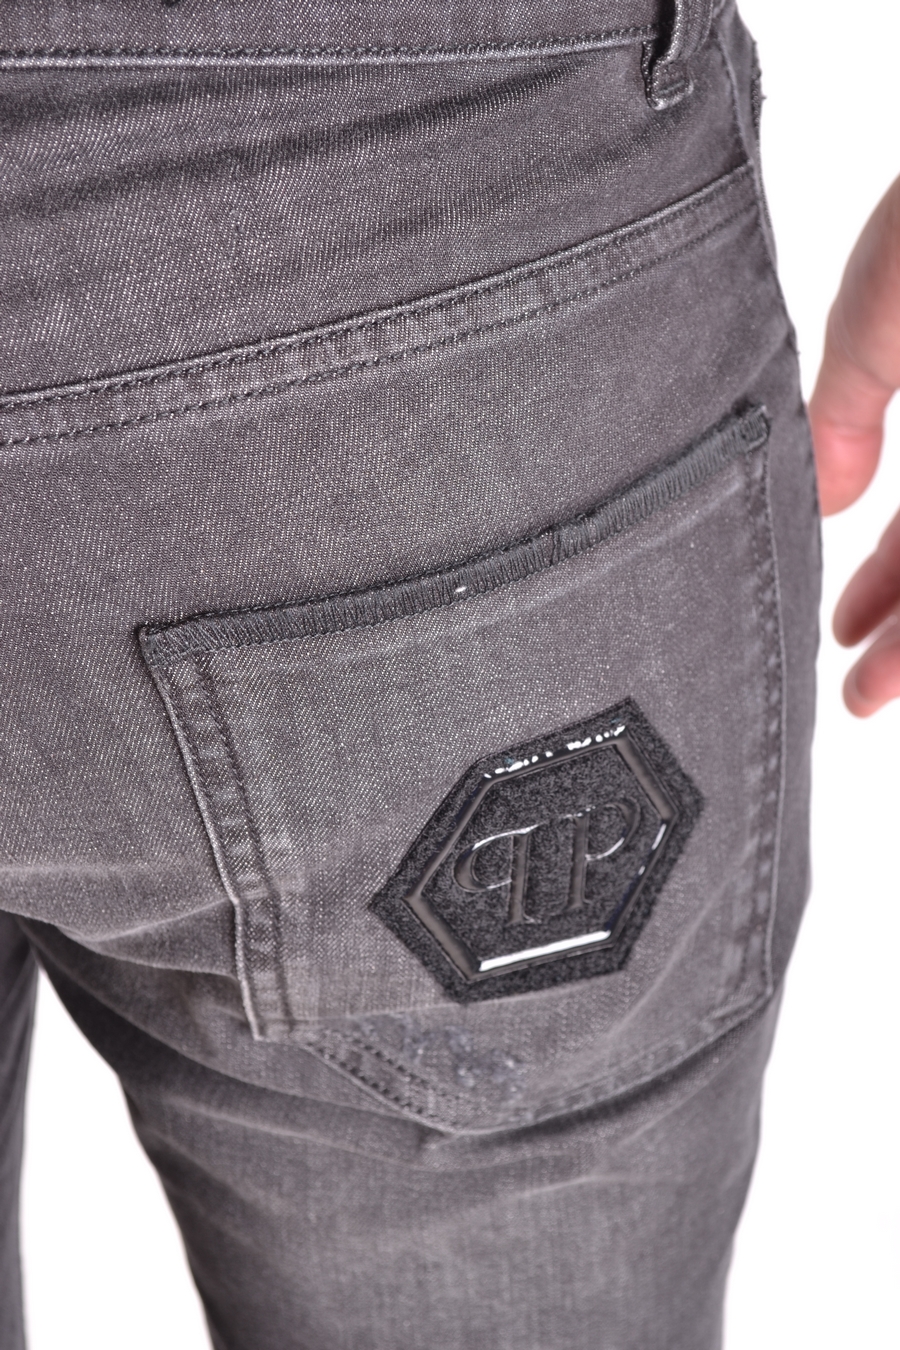 philipp plein jeans in south africa